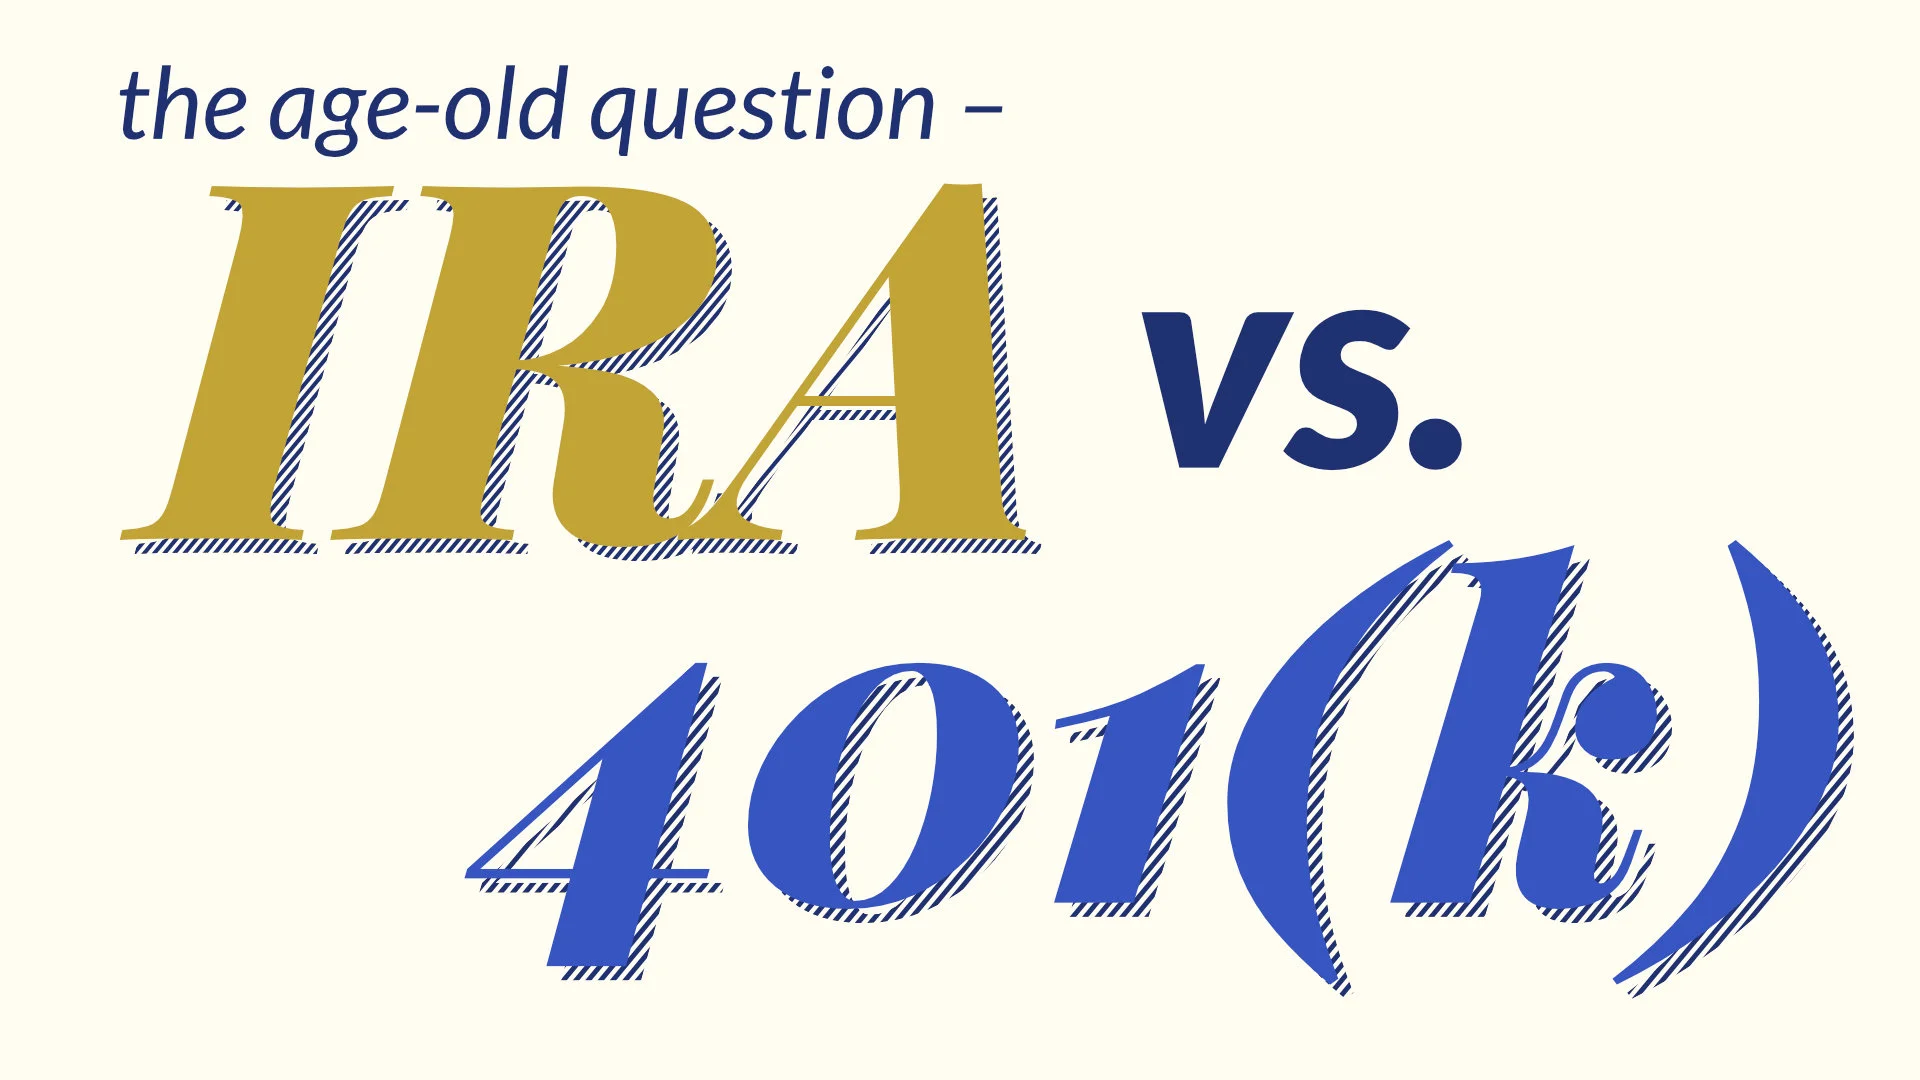 Differences between 401(k) and IRA accounts include administration, loan policy and contribution limits